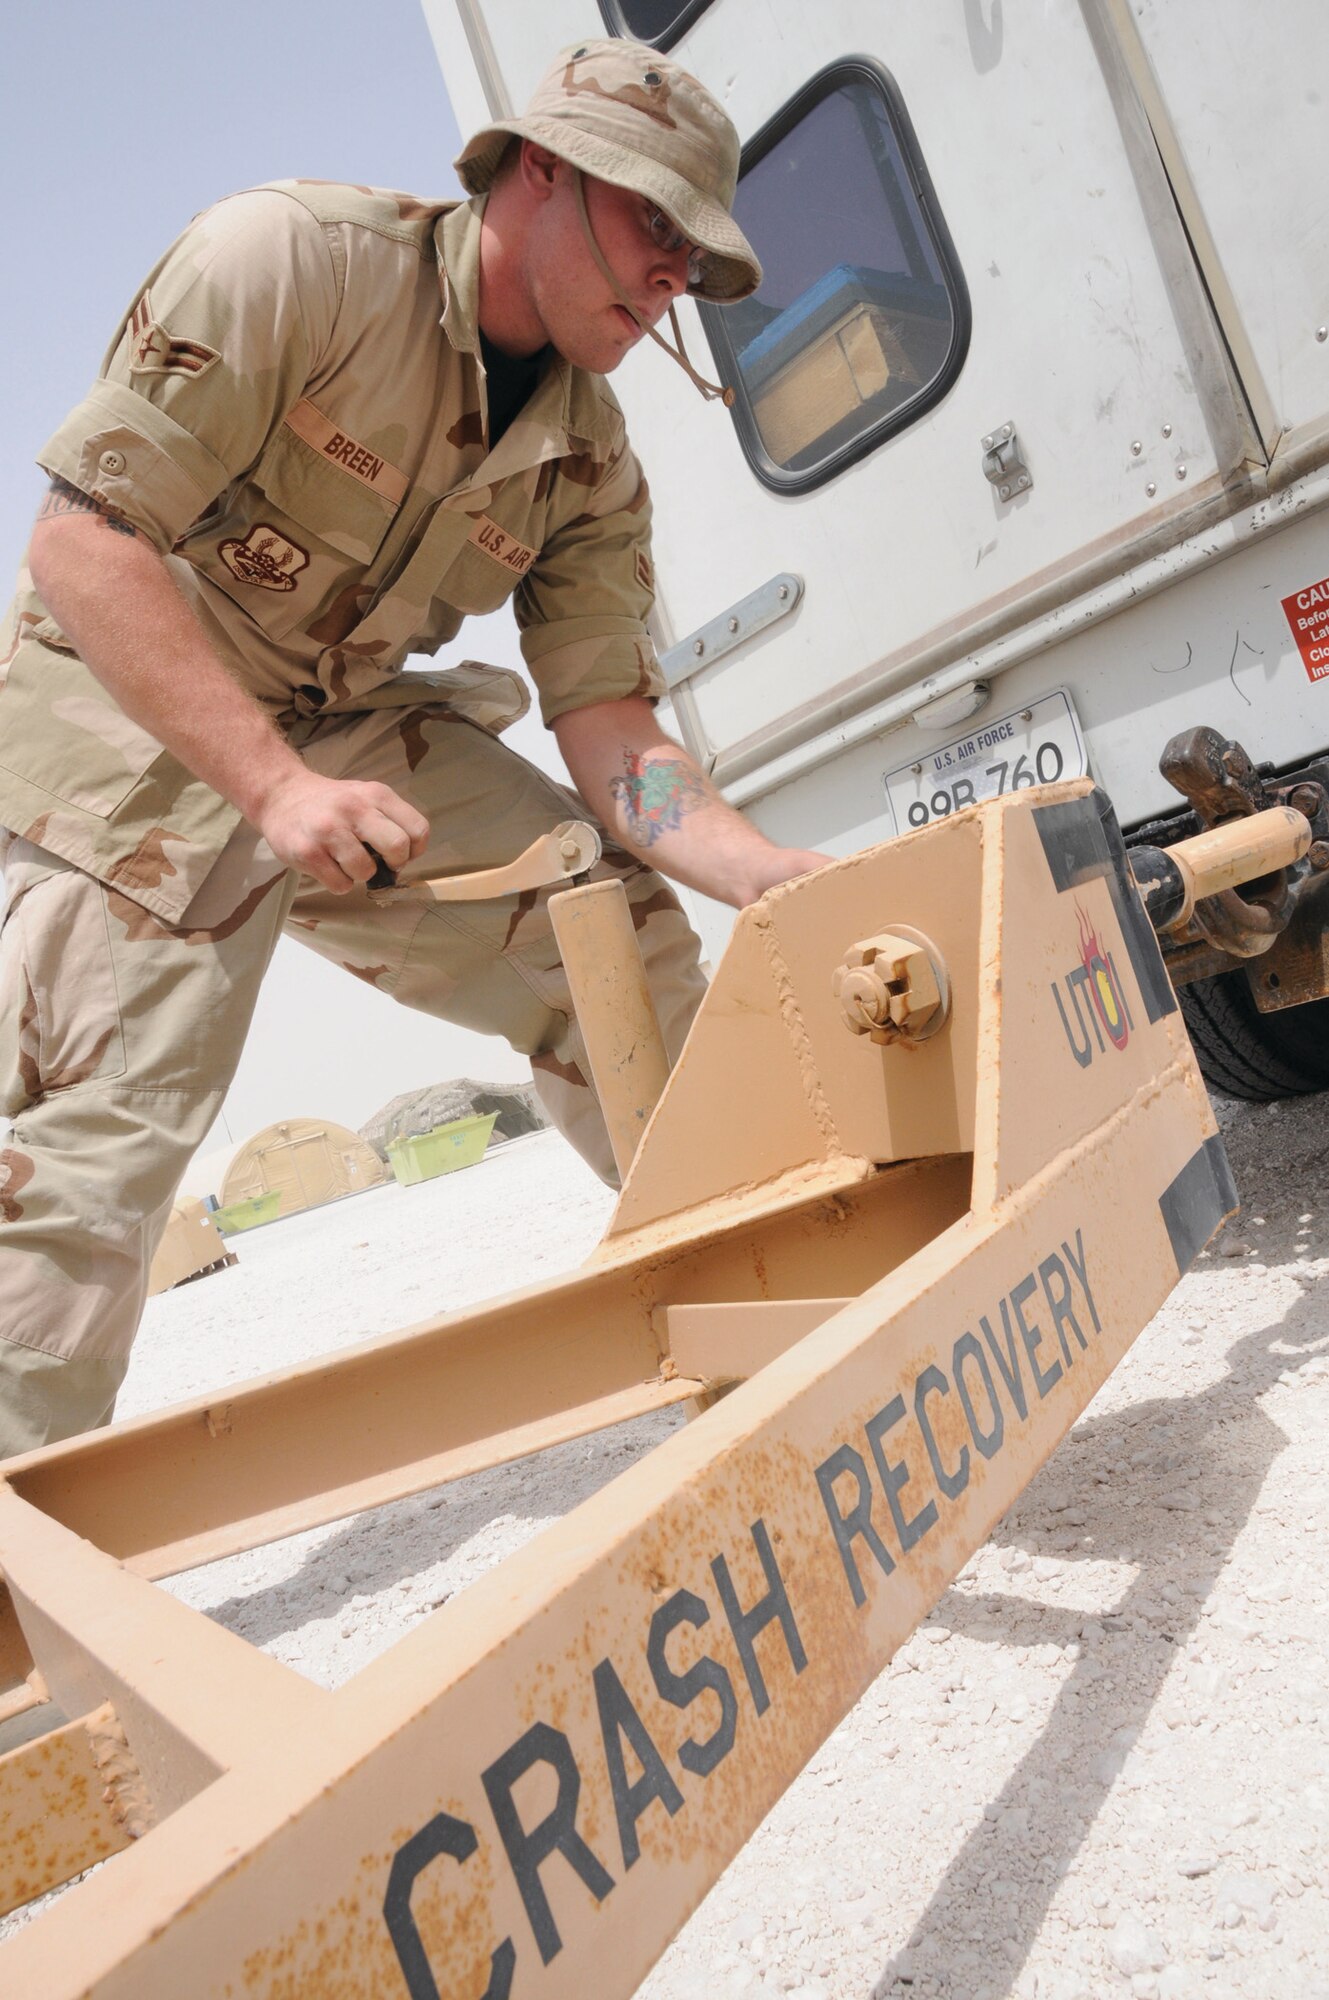 Airman 1st Class Daniel Breen, repair and reclamation journeyman with the 379th Expeditionary Maintenance Squadron, connects the Recovery 4 van to a jack trailer Aug. 14, 2008, at an undisclosed air base in Southwest Asia. The 379th Expeditionary Maintenance Squadron is responsible for recovering aircraft and clearing the debris of crashed aircraft throughout the U.S. Central Command’s area of responsibility. Airman Breen, a native of Alliance, Neb., is deployed from Grand forks Air Force Base, N.D., and Airman Saari, a native of Las Vegas, Nev., is deployed from Ellsworth Air Force Base, S.D., in support of Operations Iraqi Freedom, Enduring Freedom and Joint Task Force-Horn of Africa. (U.S. Air Force photo by Staff Sgt. Darnell T. Cannady)